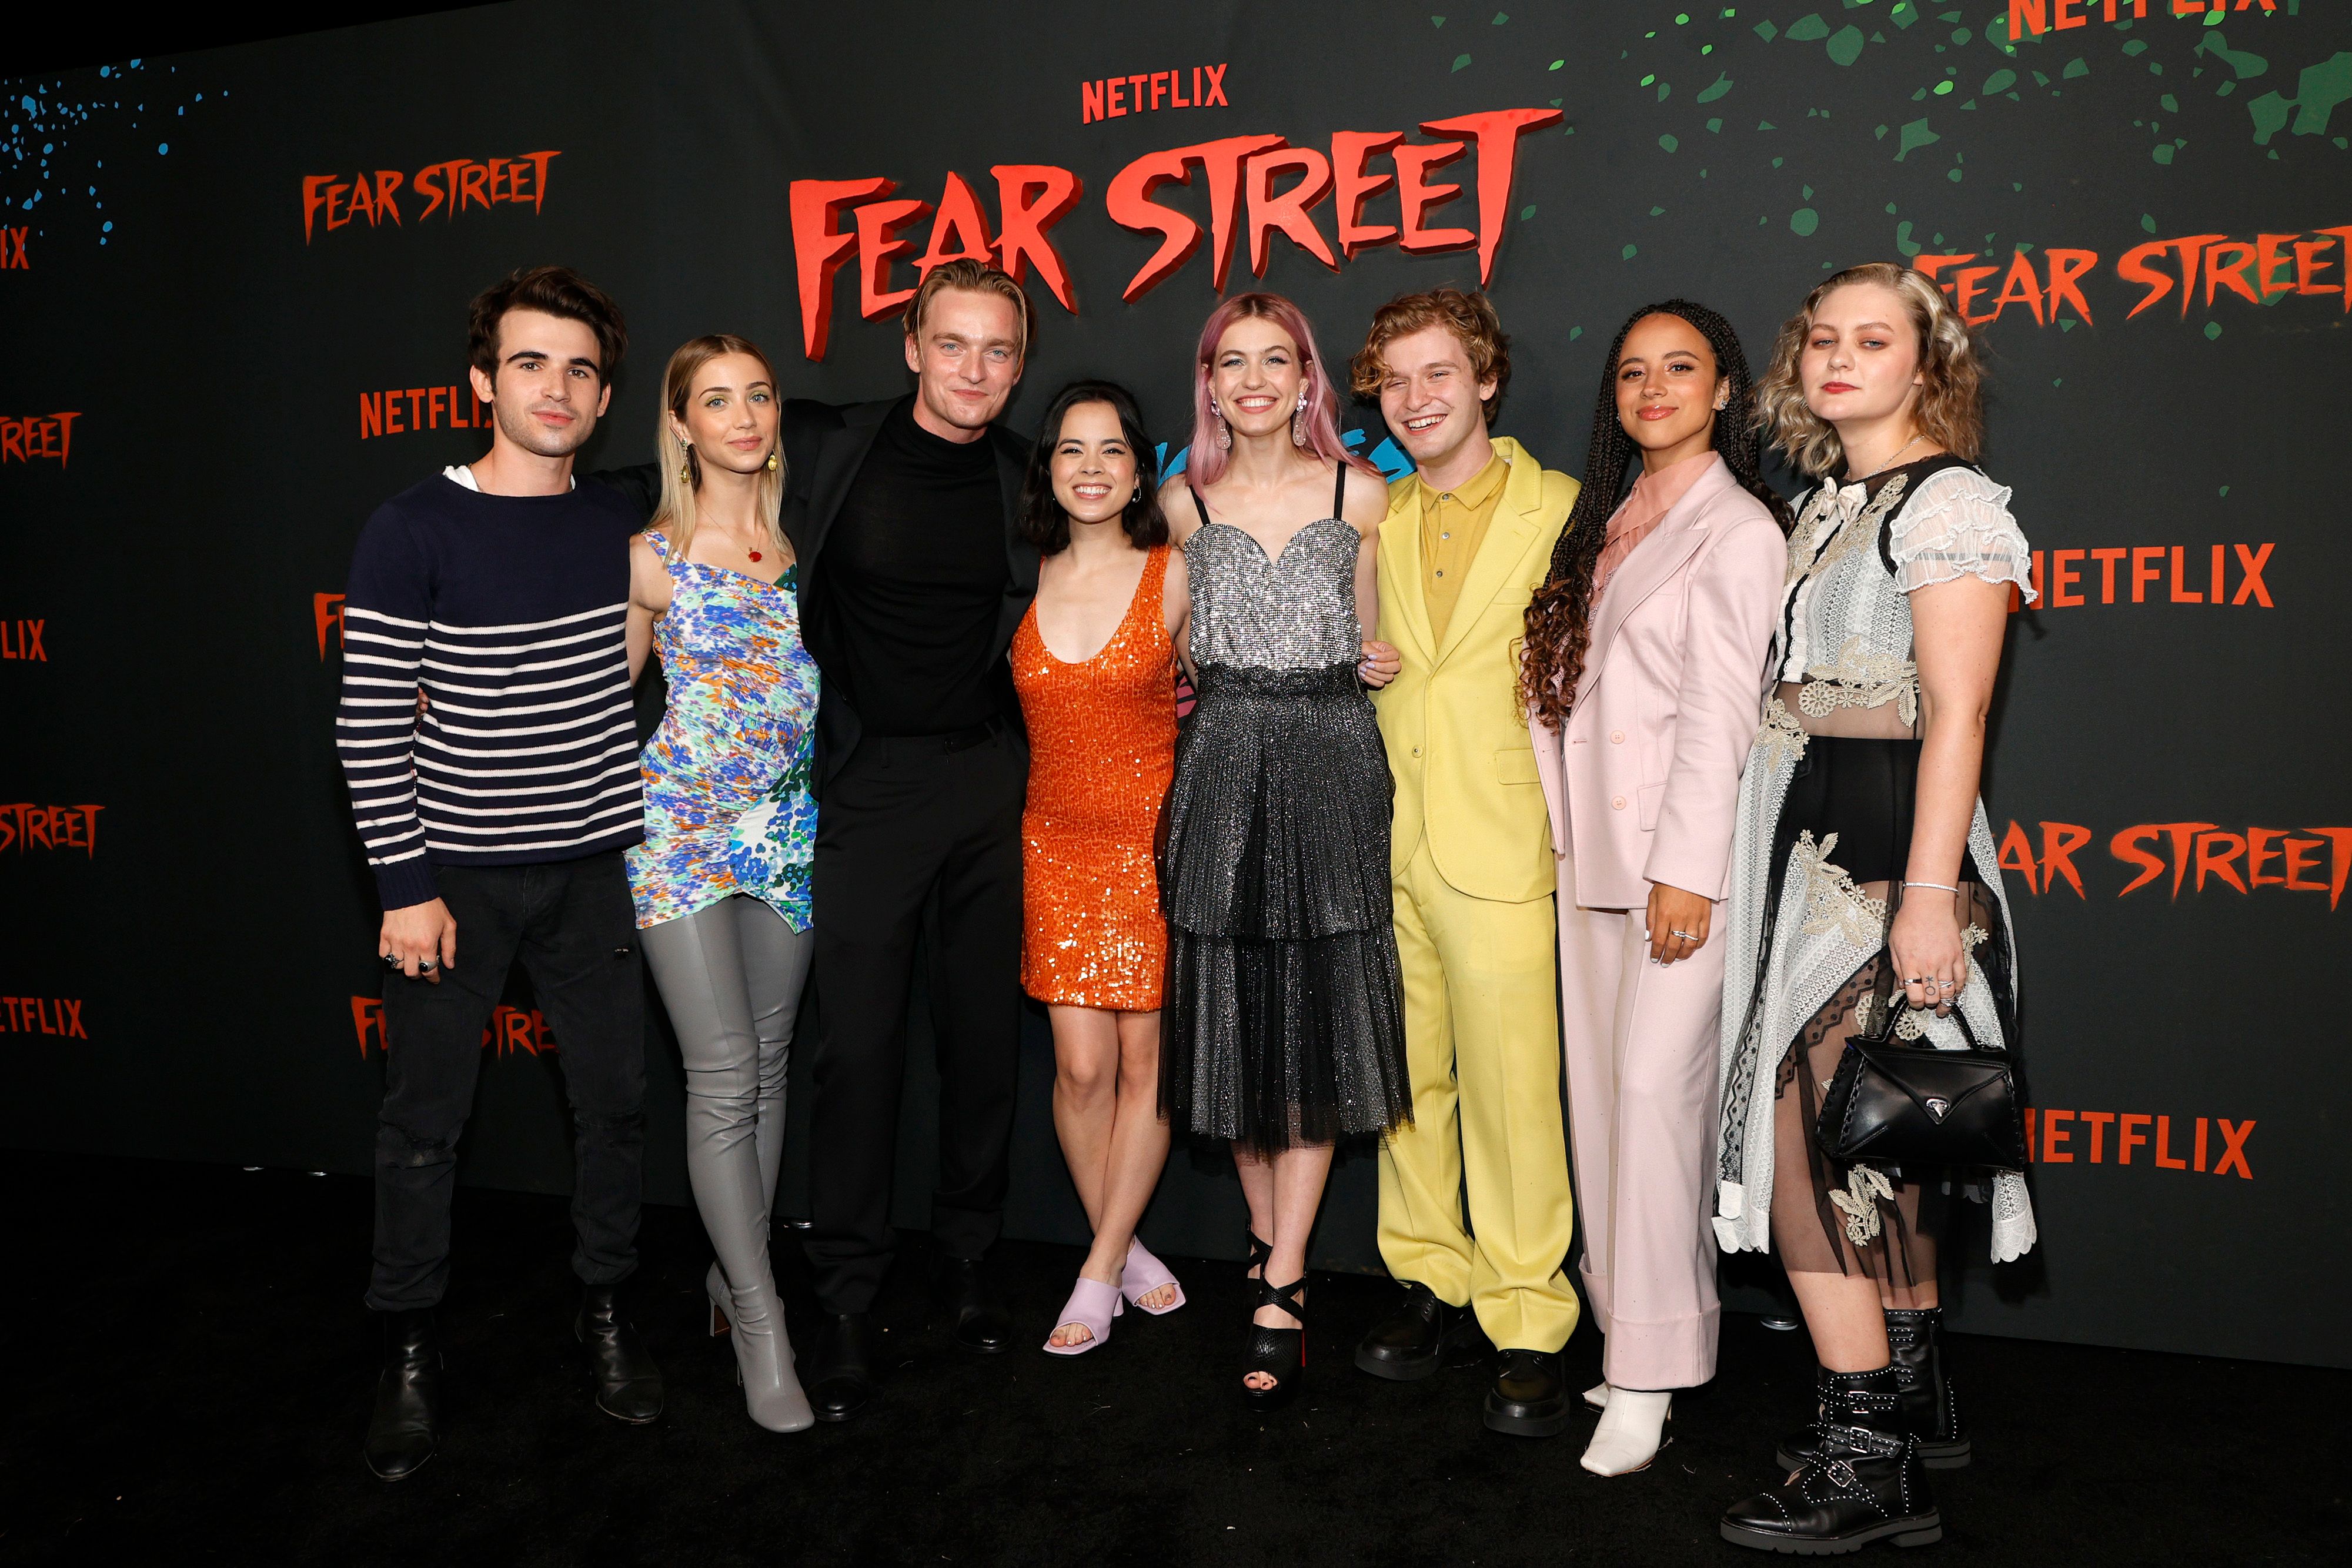 The 'Fear Street' cast wraps their arms around each other.